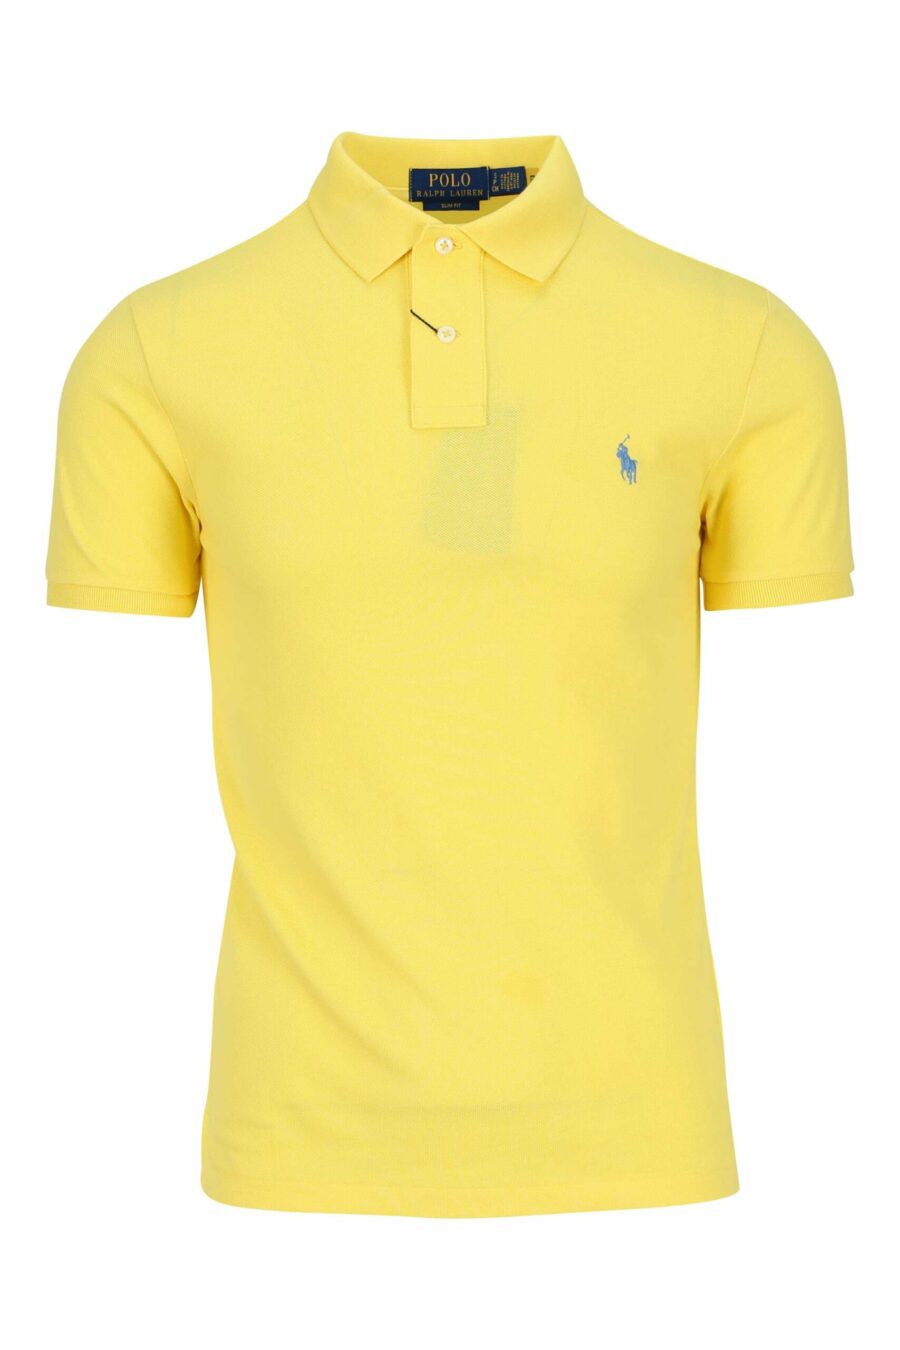 Yellow and blue T-shirt with mini-logo "polo" - 3616535972186 scaled